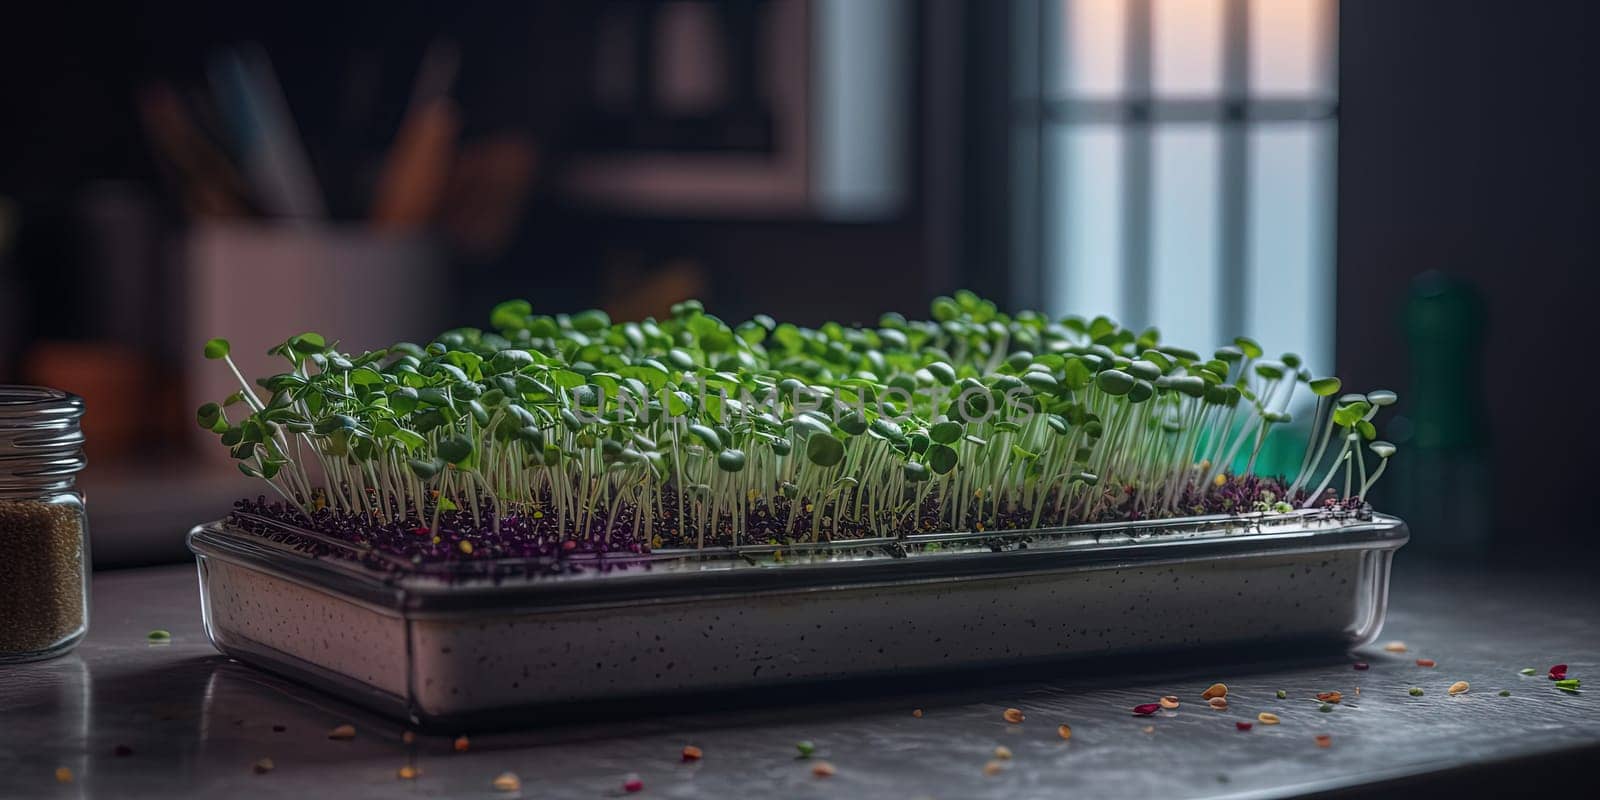 Growing micro green sprouts in container, healthy organic farm in the kitchen